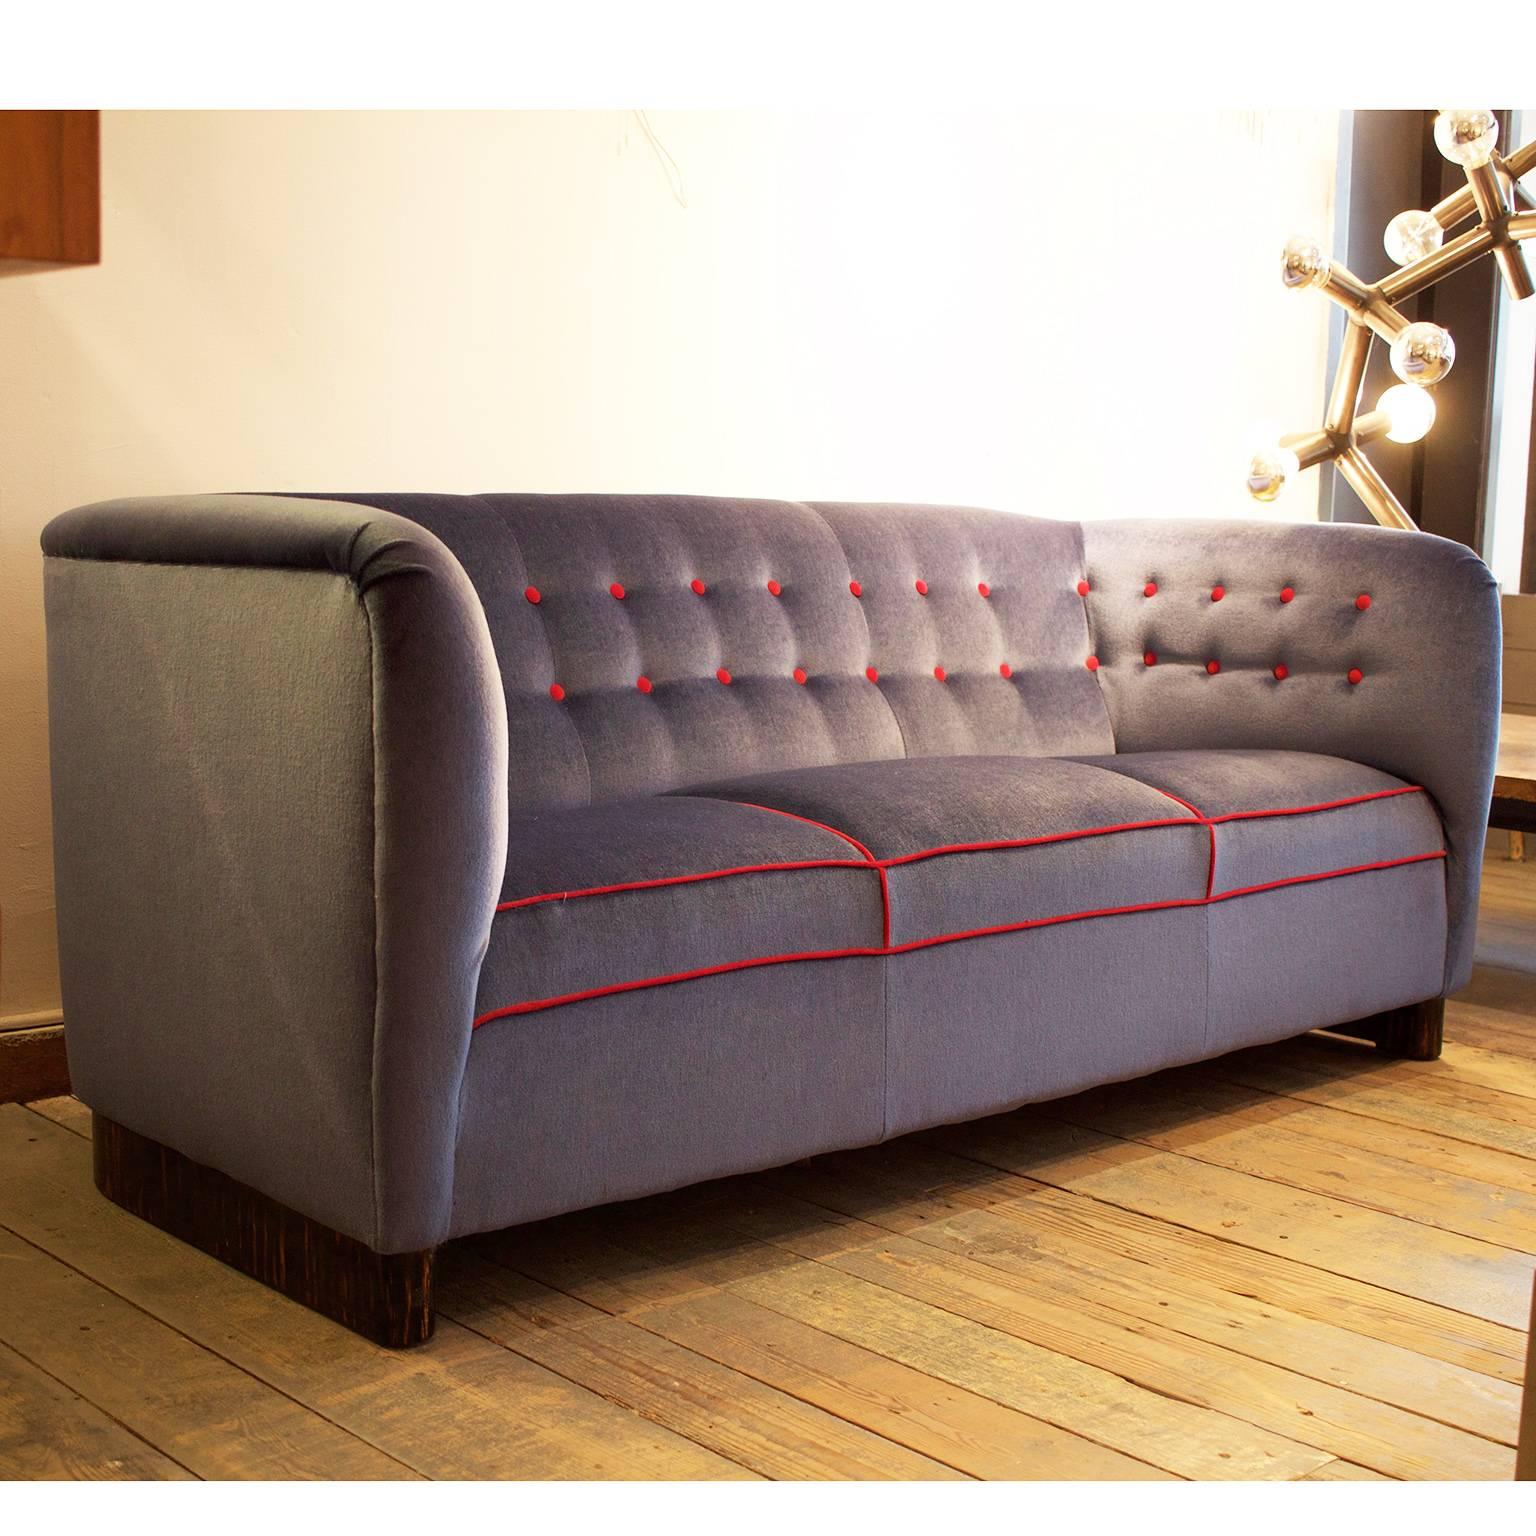 Three-seat sofa with plinth of dark stained beech upholstered with blue velvet fabric and red velvet piping and tufting buttons.

Manufactured by Fritz Hansen.